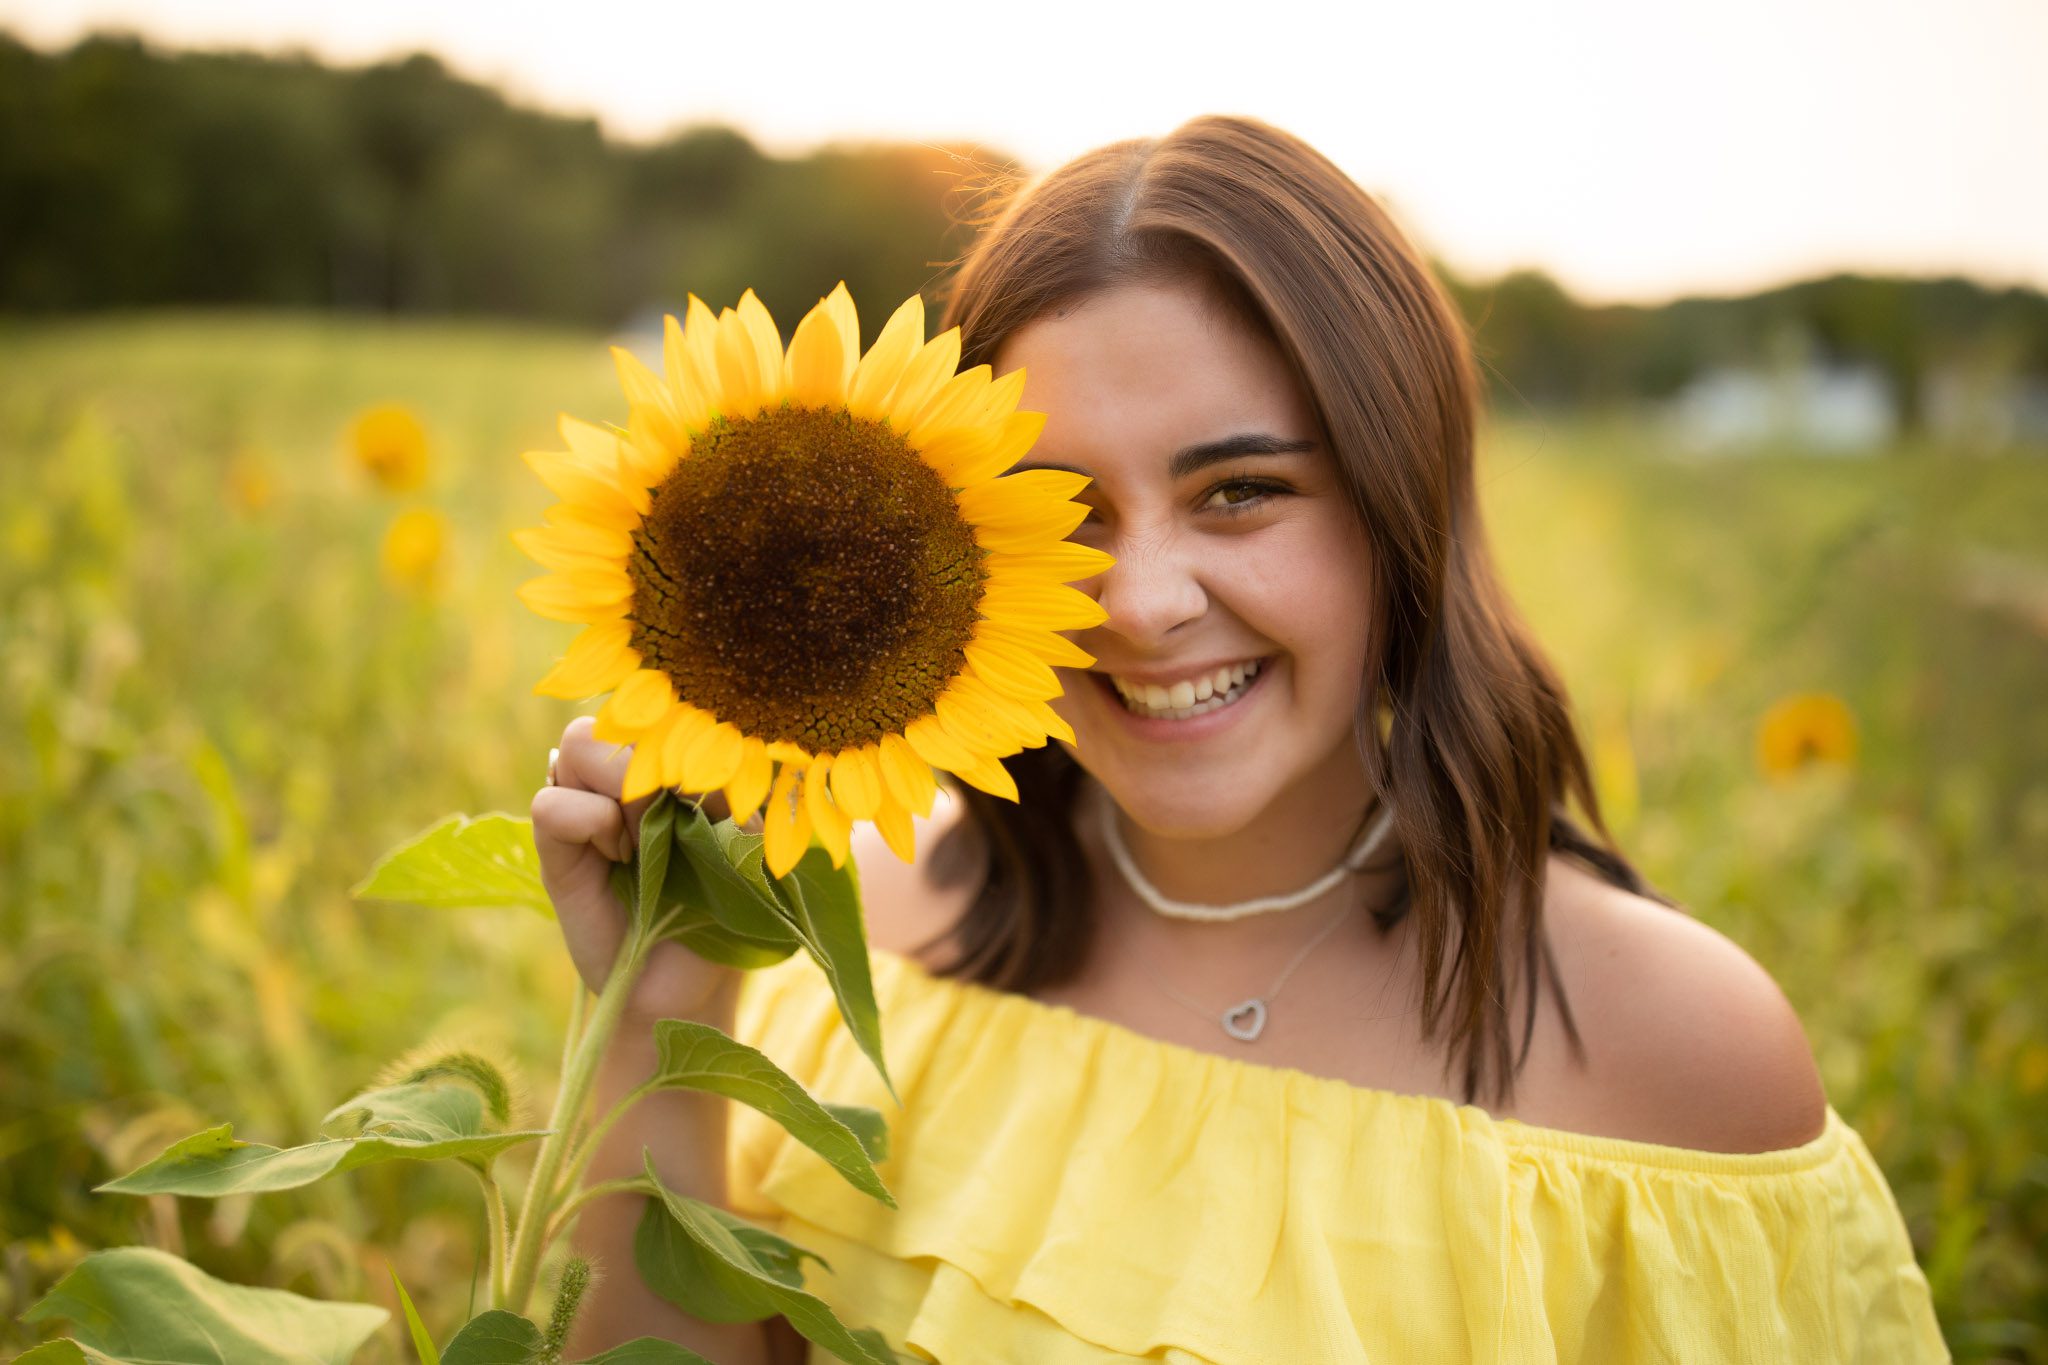 high school summer senior portrait of a young woman in a yellow dress standing in a field of sunflowers holding a sunflower up to her face in Massachusetts